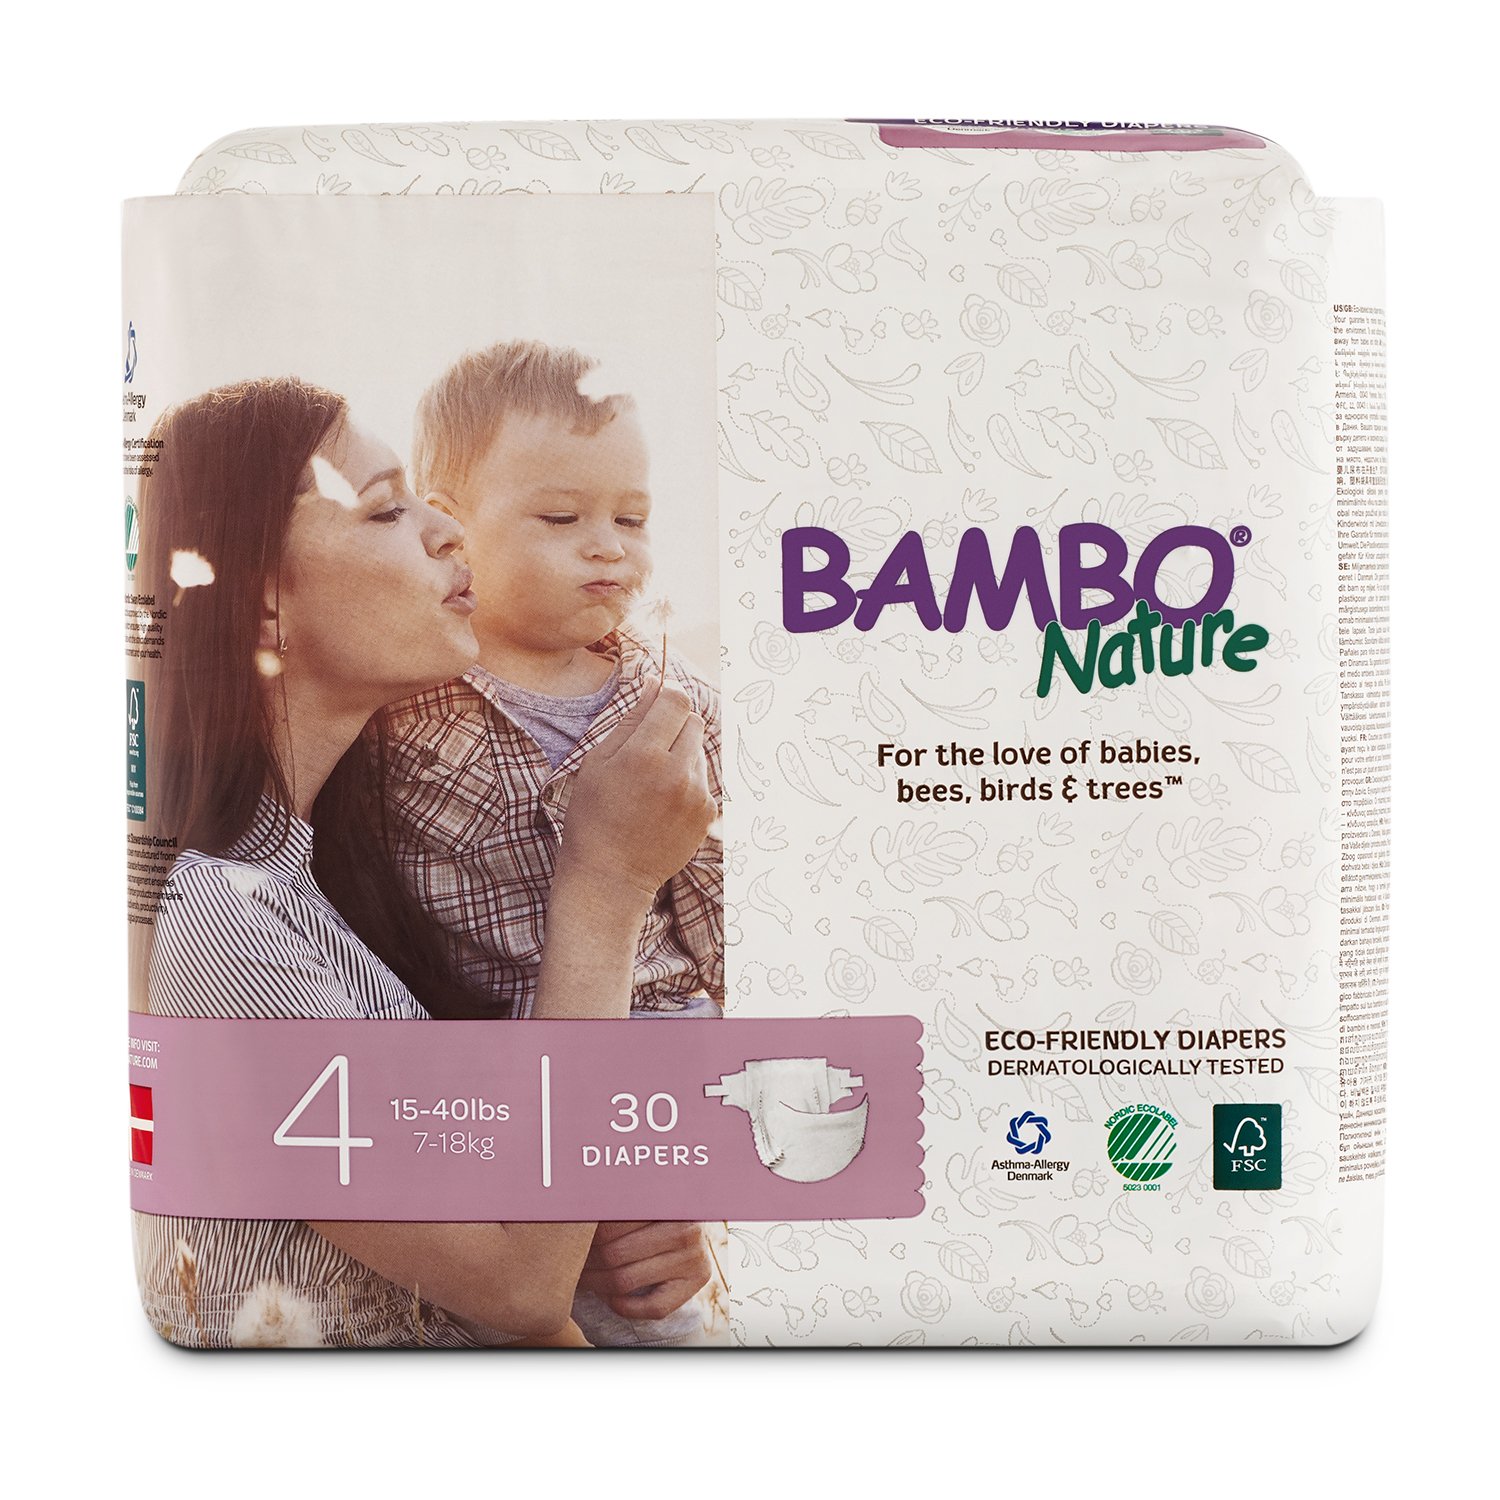 Bambo Nature diapers